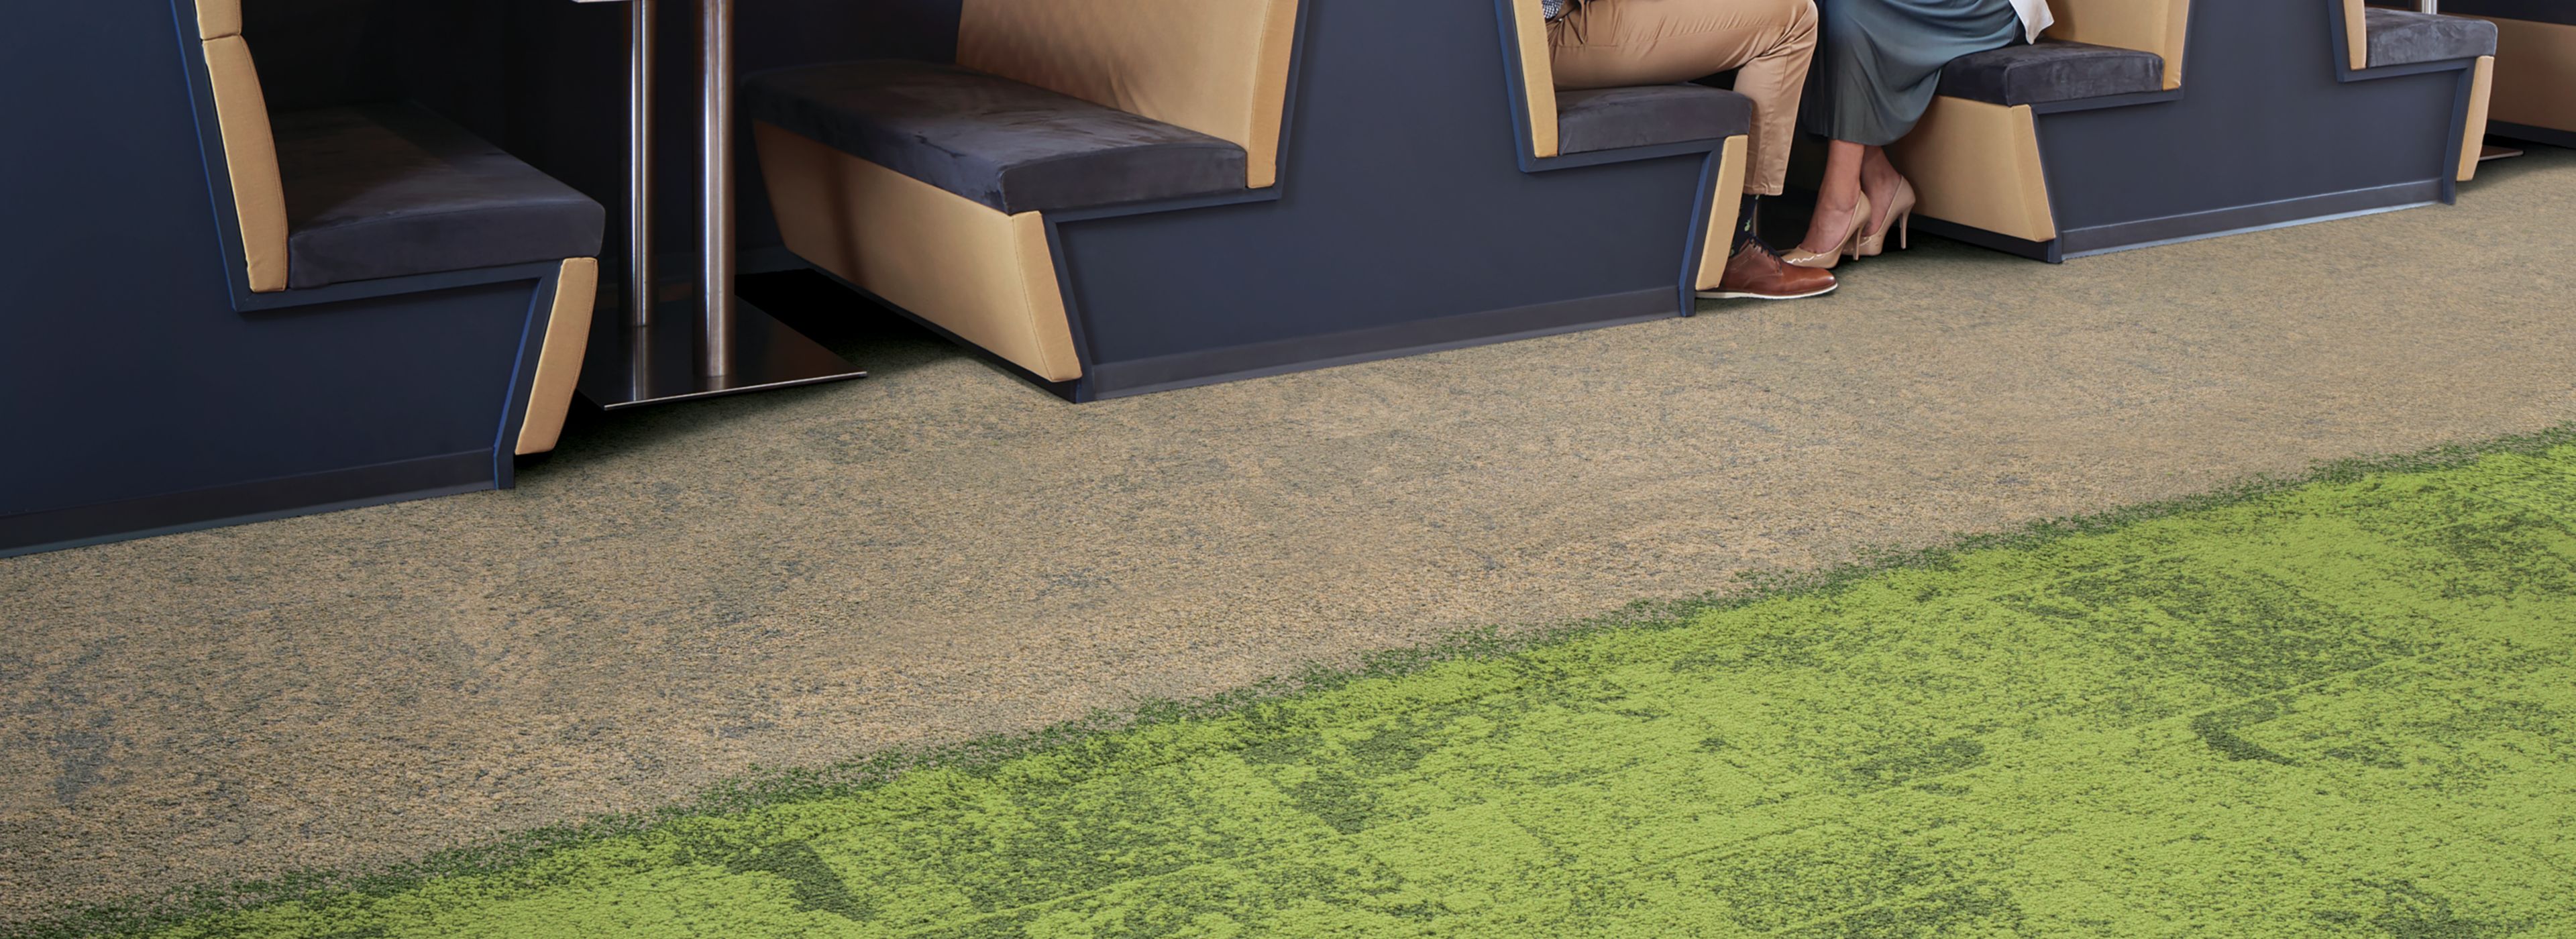 Interface UR101, UR102 and UR103 carpet tile in meeting space with booths imagen número 1